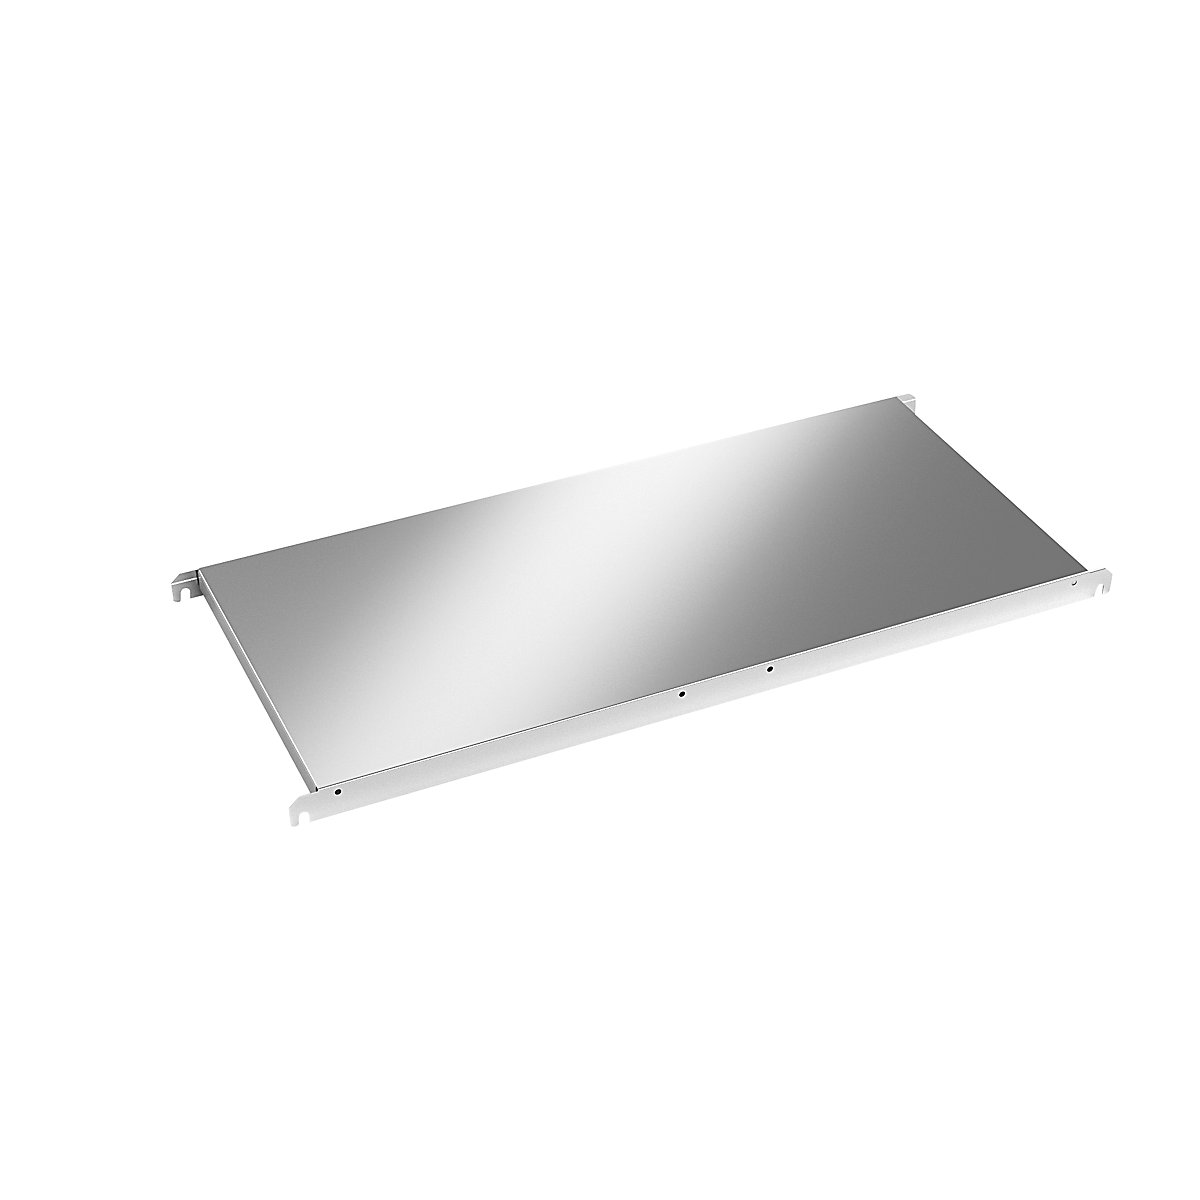 Stainless steel shelf, solid, WxD 940 x 440 mm